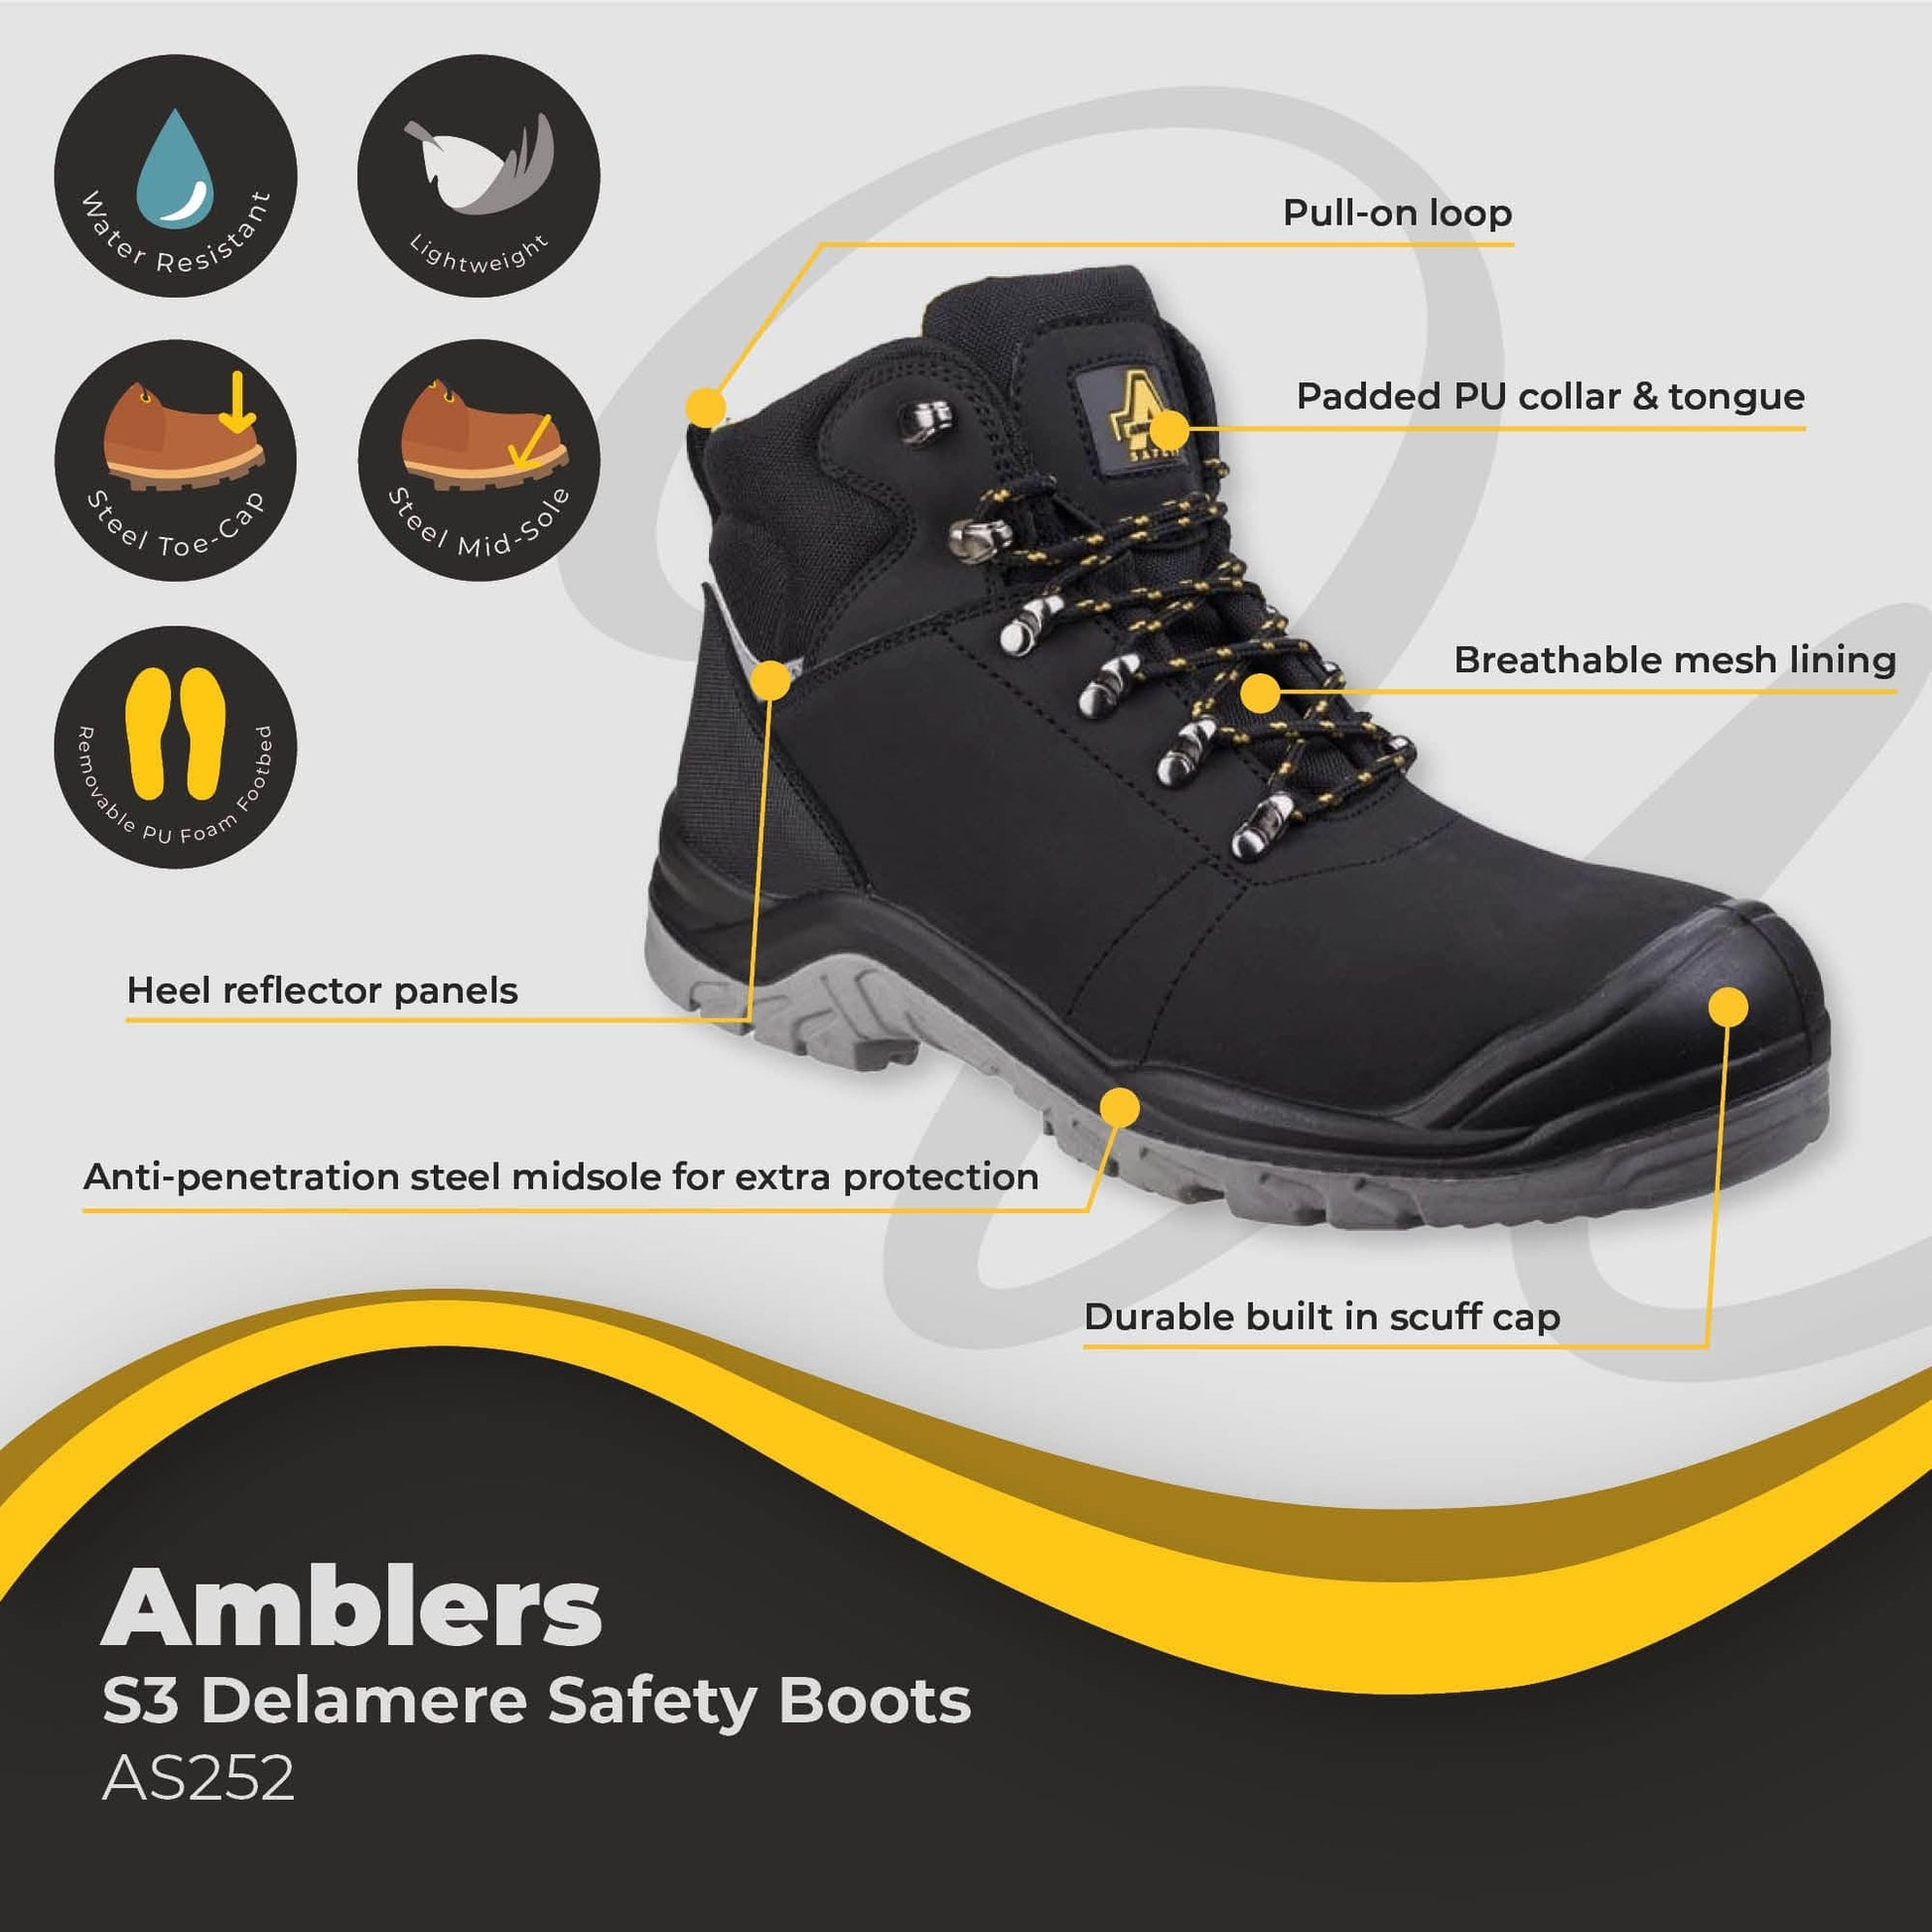 amblers delamere safety boots s3 as252 dd336 04